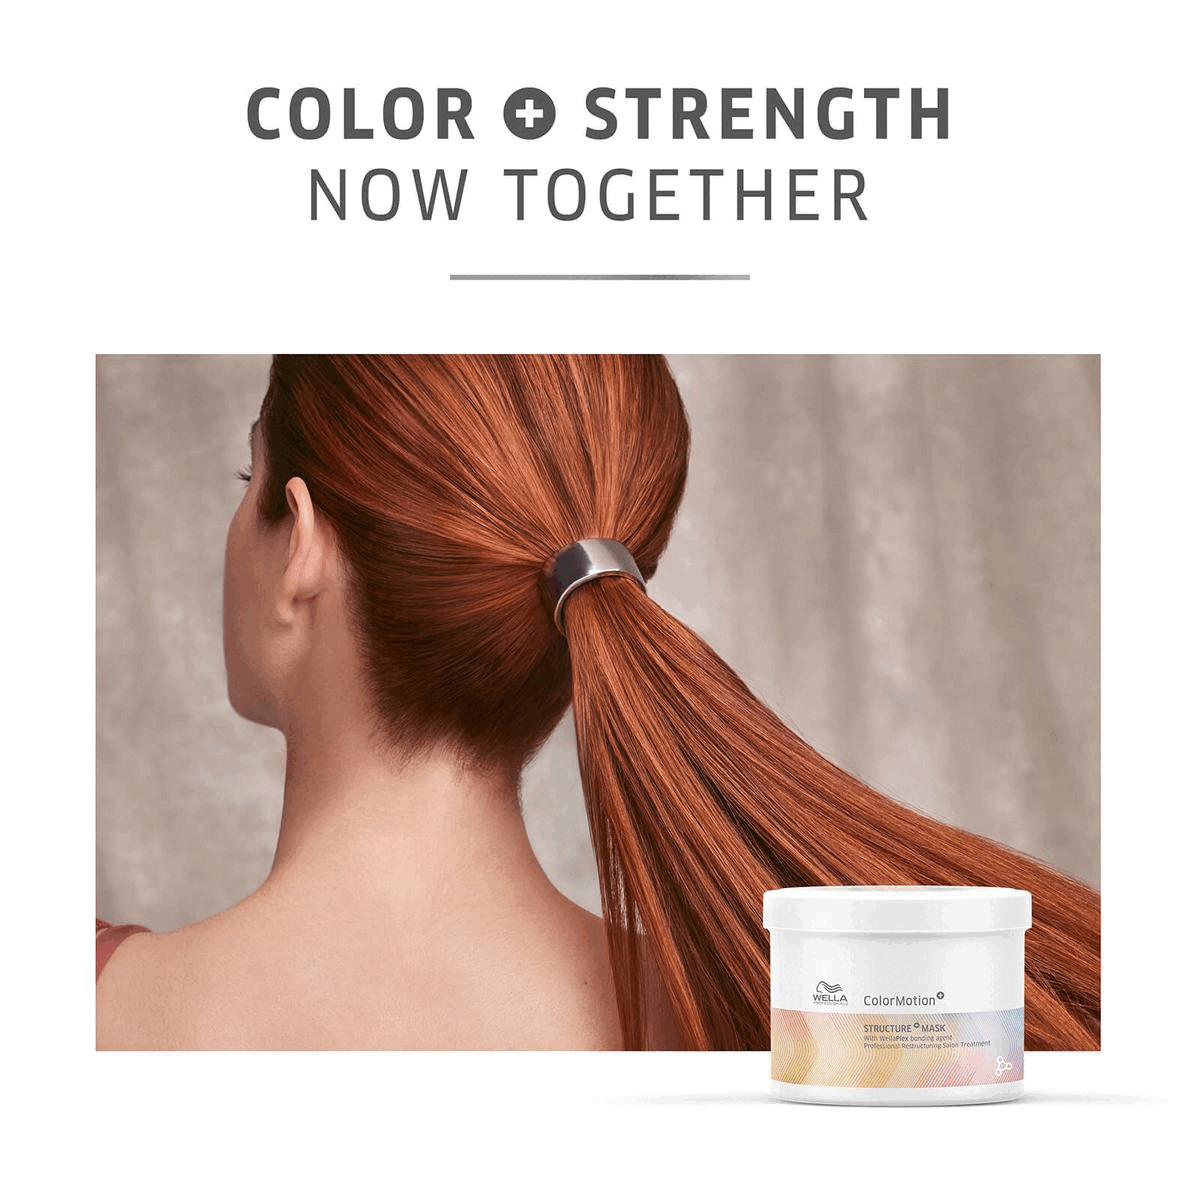 Colour + Strength Now Together
              Up to 8 weeks colour protection. Week 0, week 4, week 8, auburn hair 
              Helps to reconstruct inner hair bonds
              Before - dark blonde. After professional services - lighter blonde
              Find the perfect partner
              